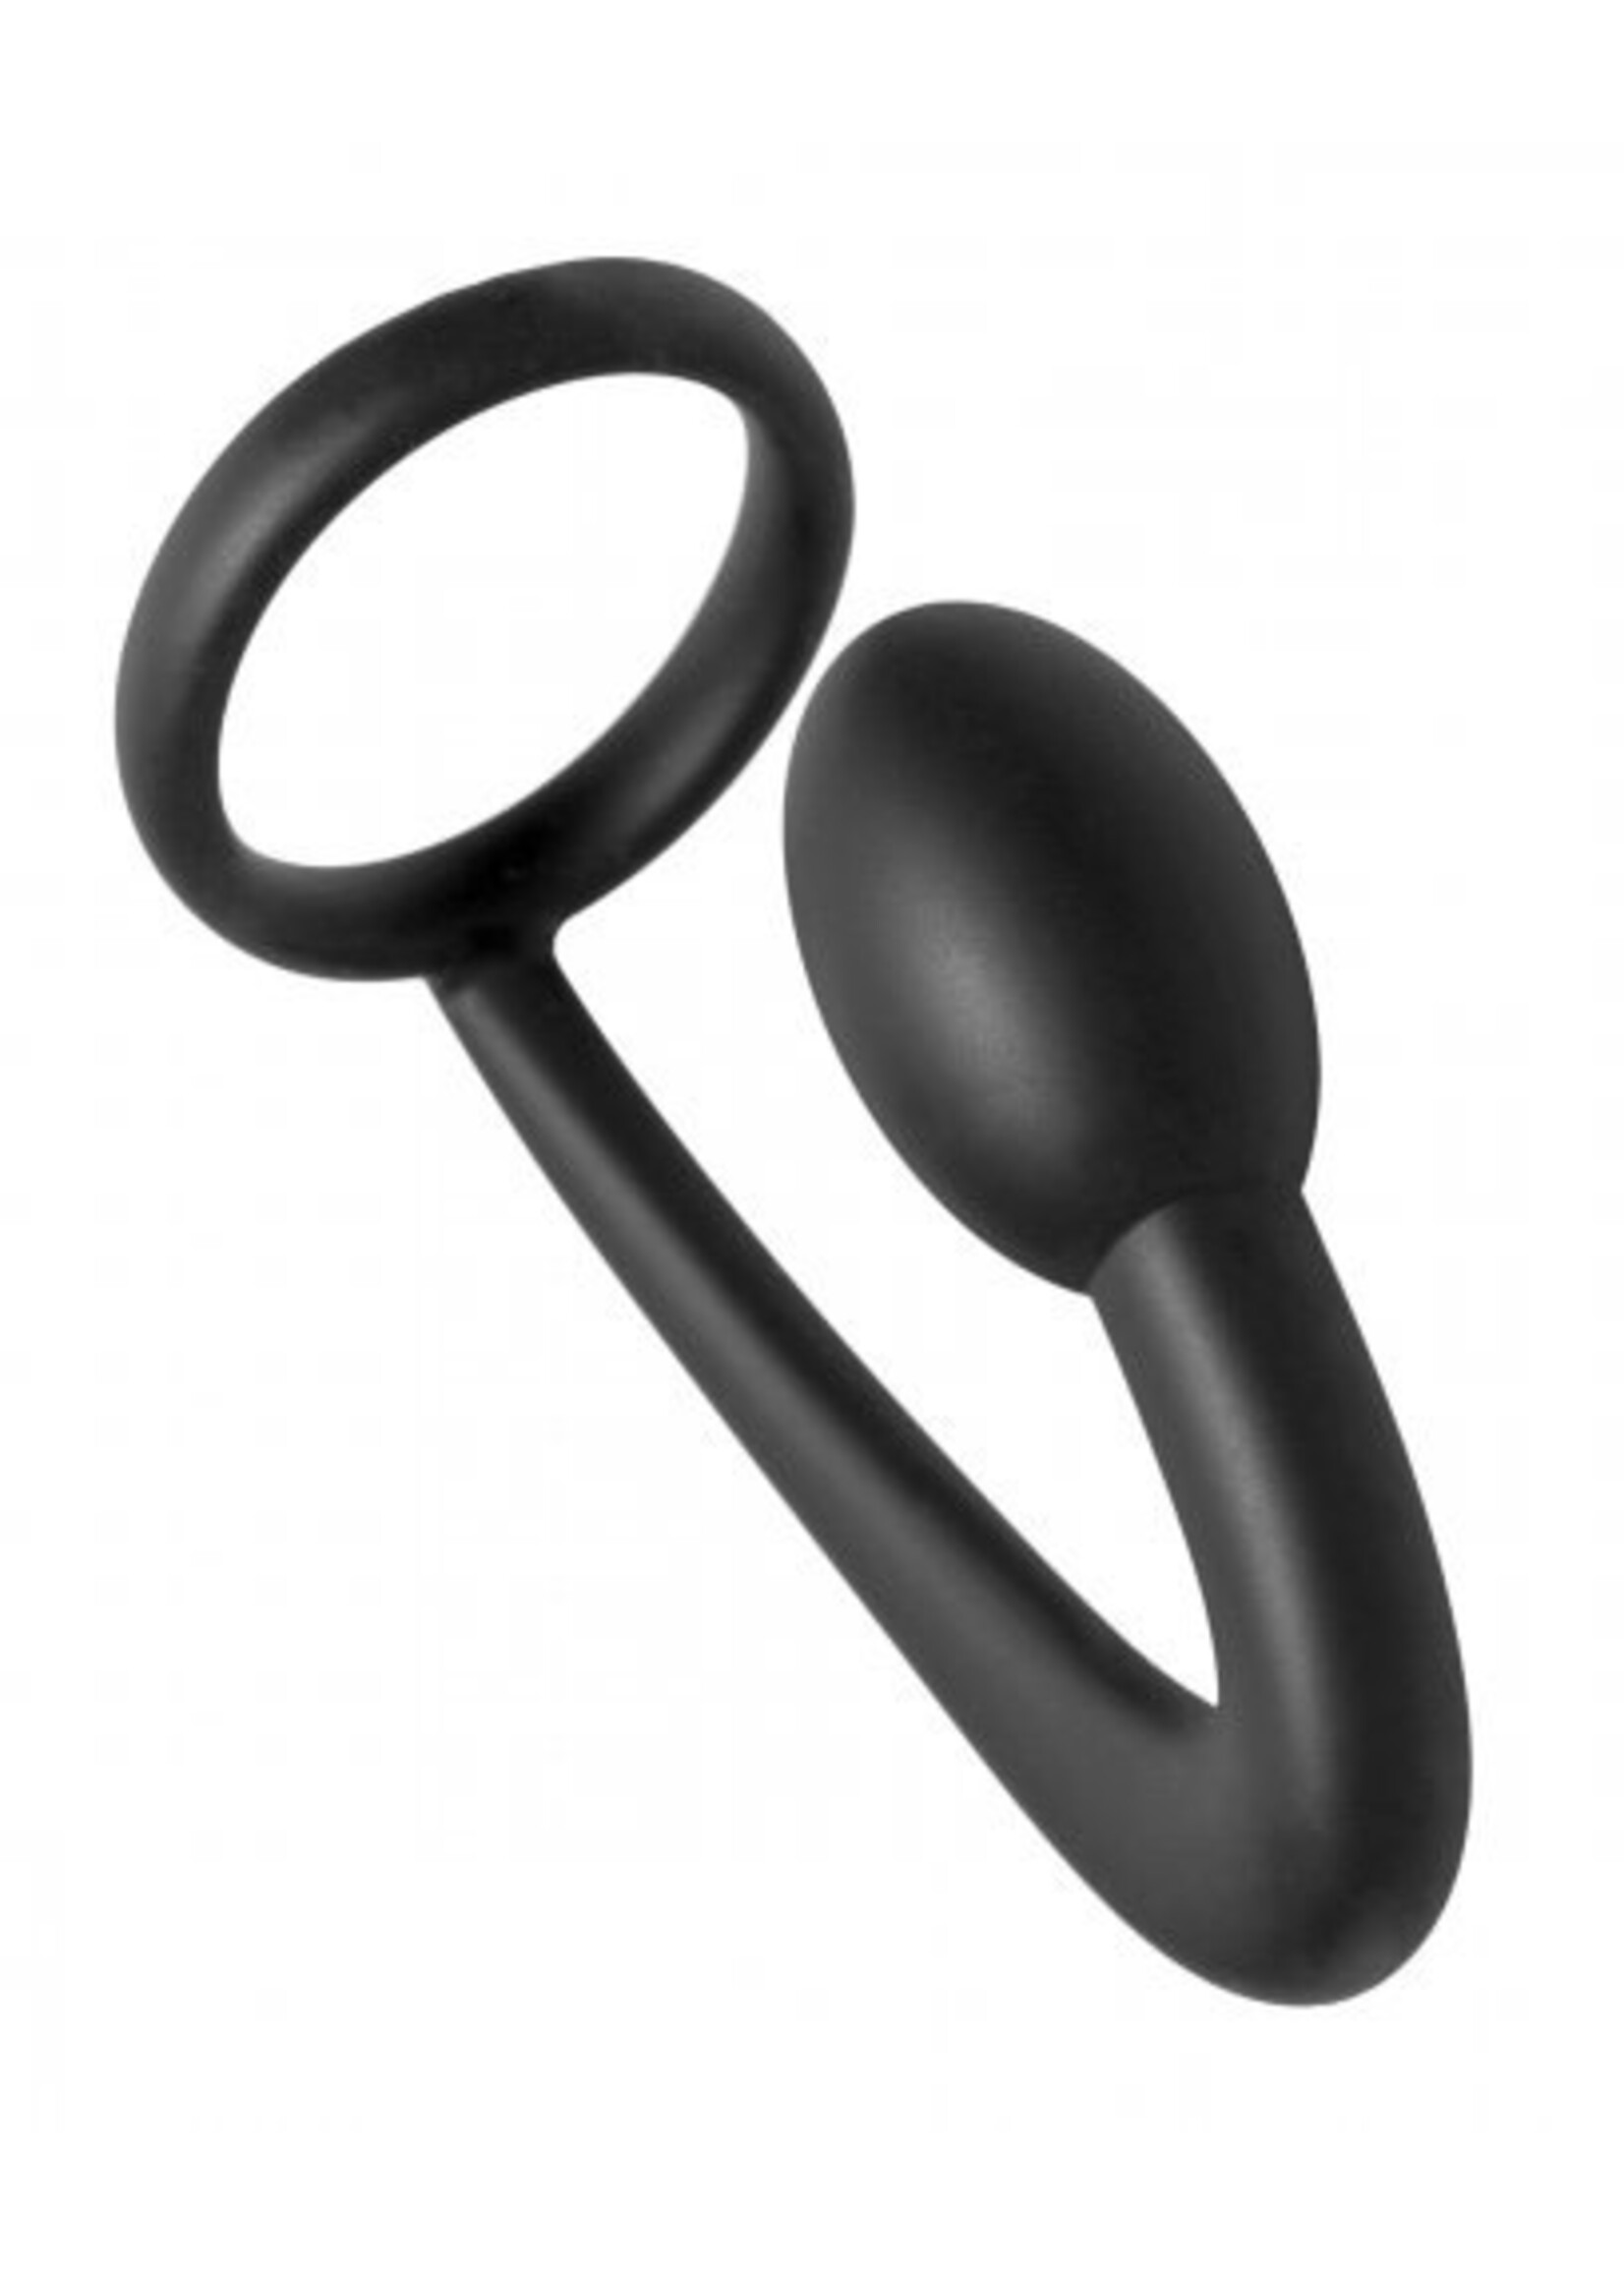 Master Series Prostatic Play Explorer Silicone Cock Ring and Prostate Plug